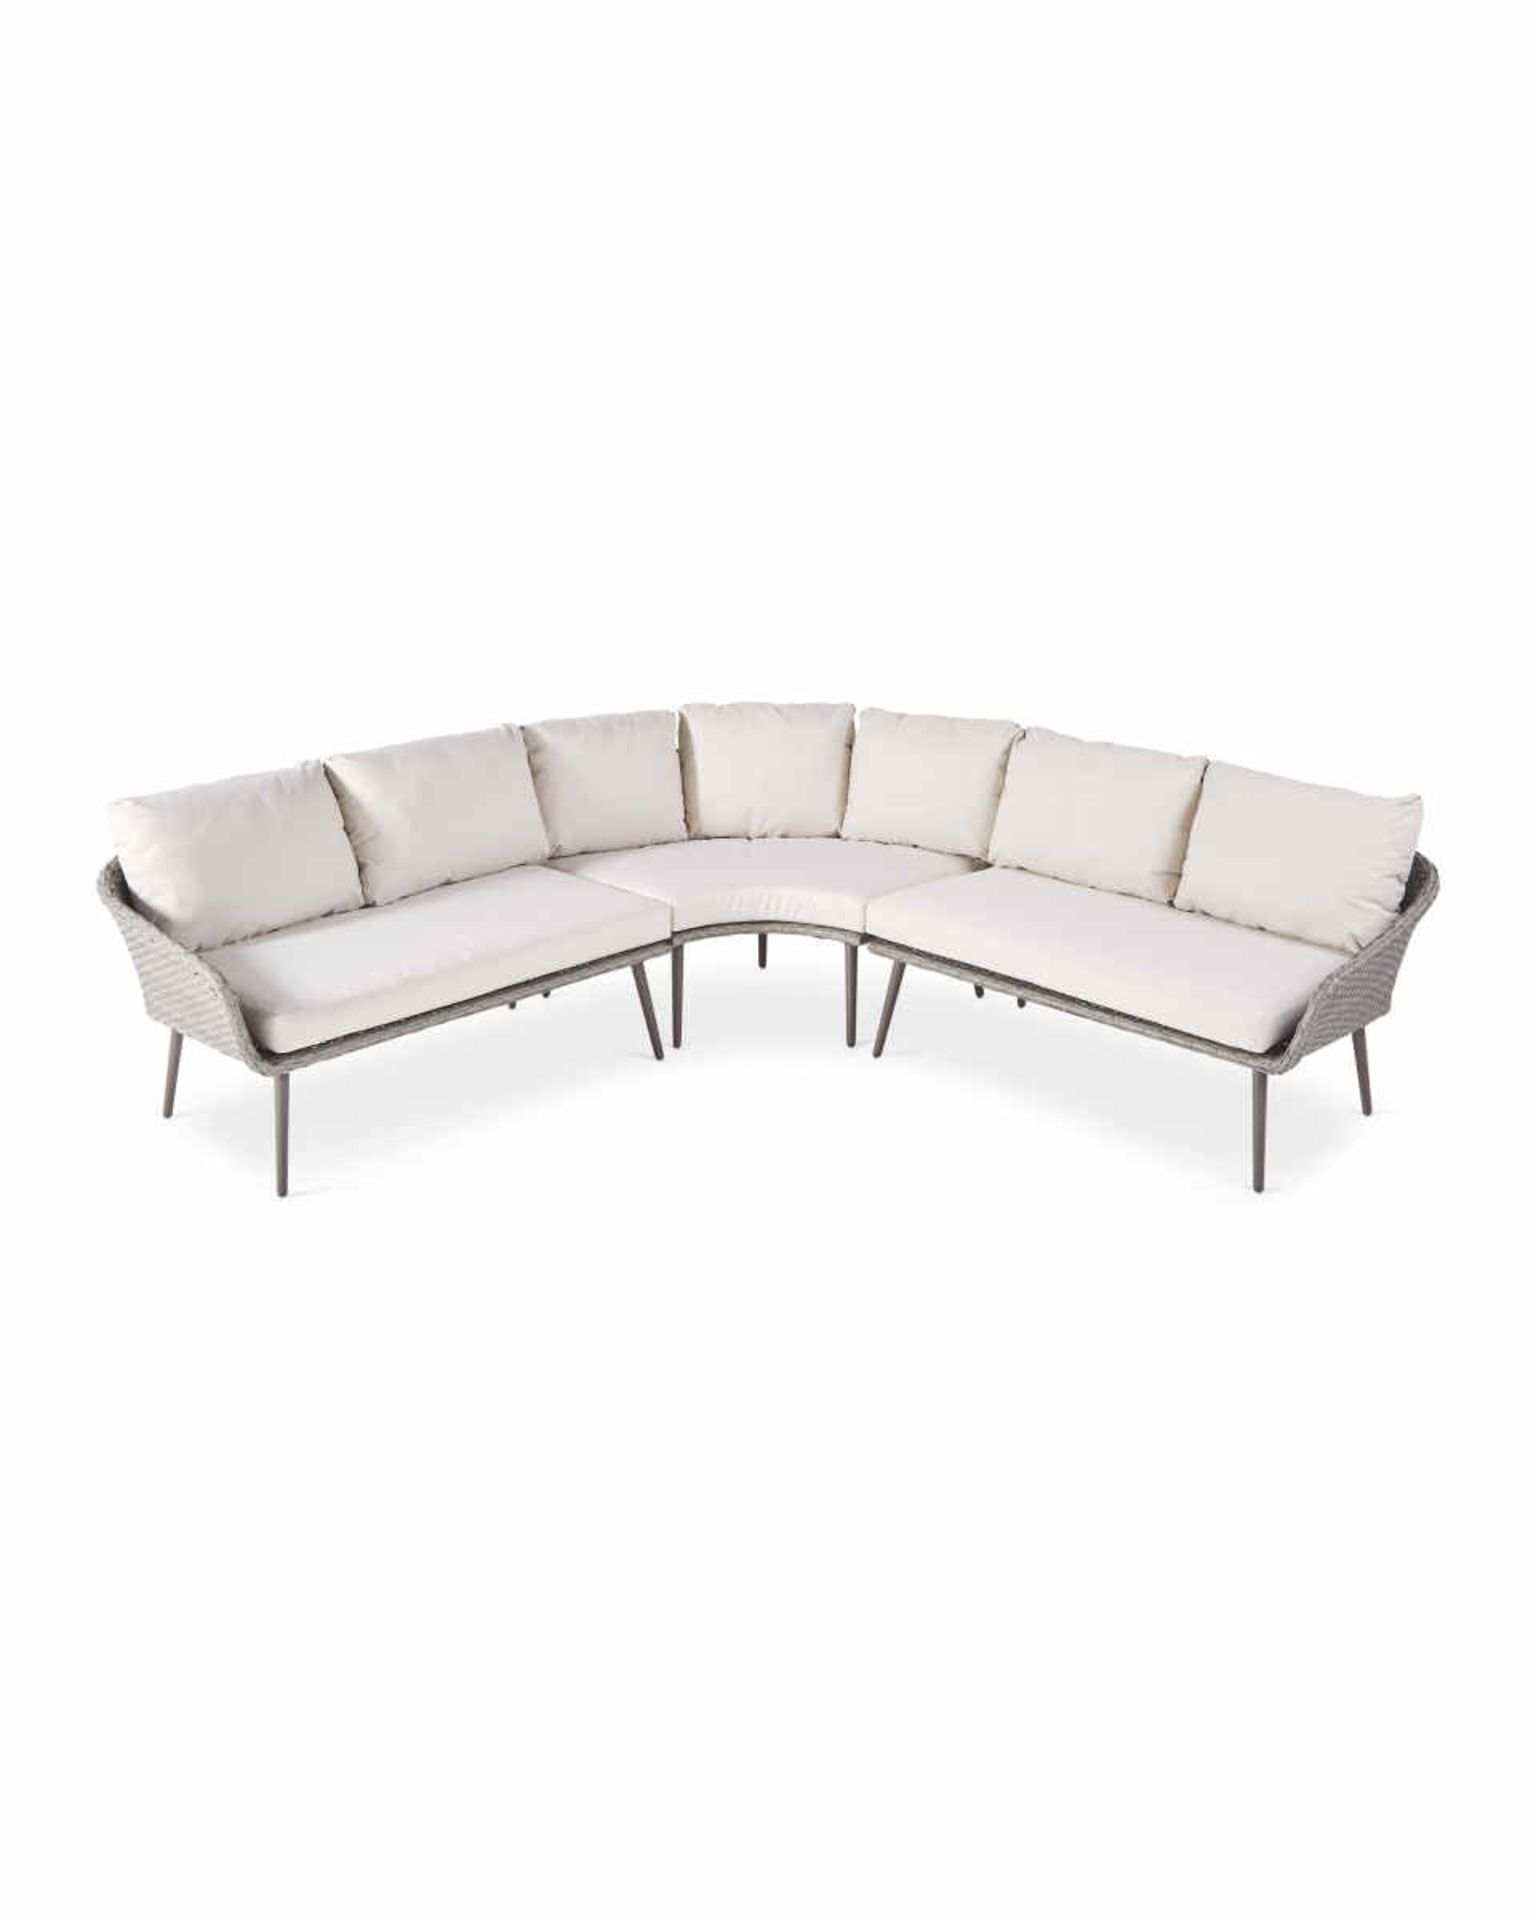 Multifunctional Lounge & Dining Corner Sofa Dining Set. Enjoy the warmer weather with this Luxury - Image 3 of 3